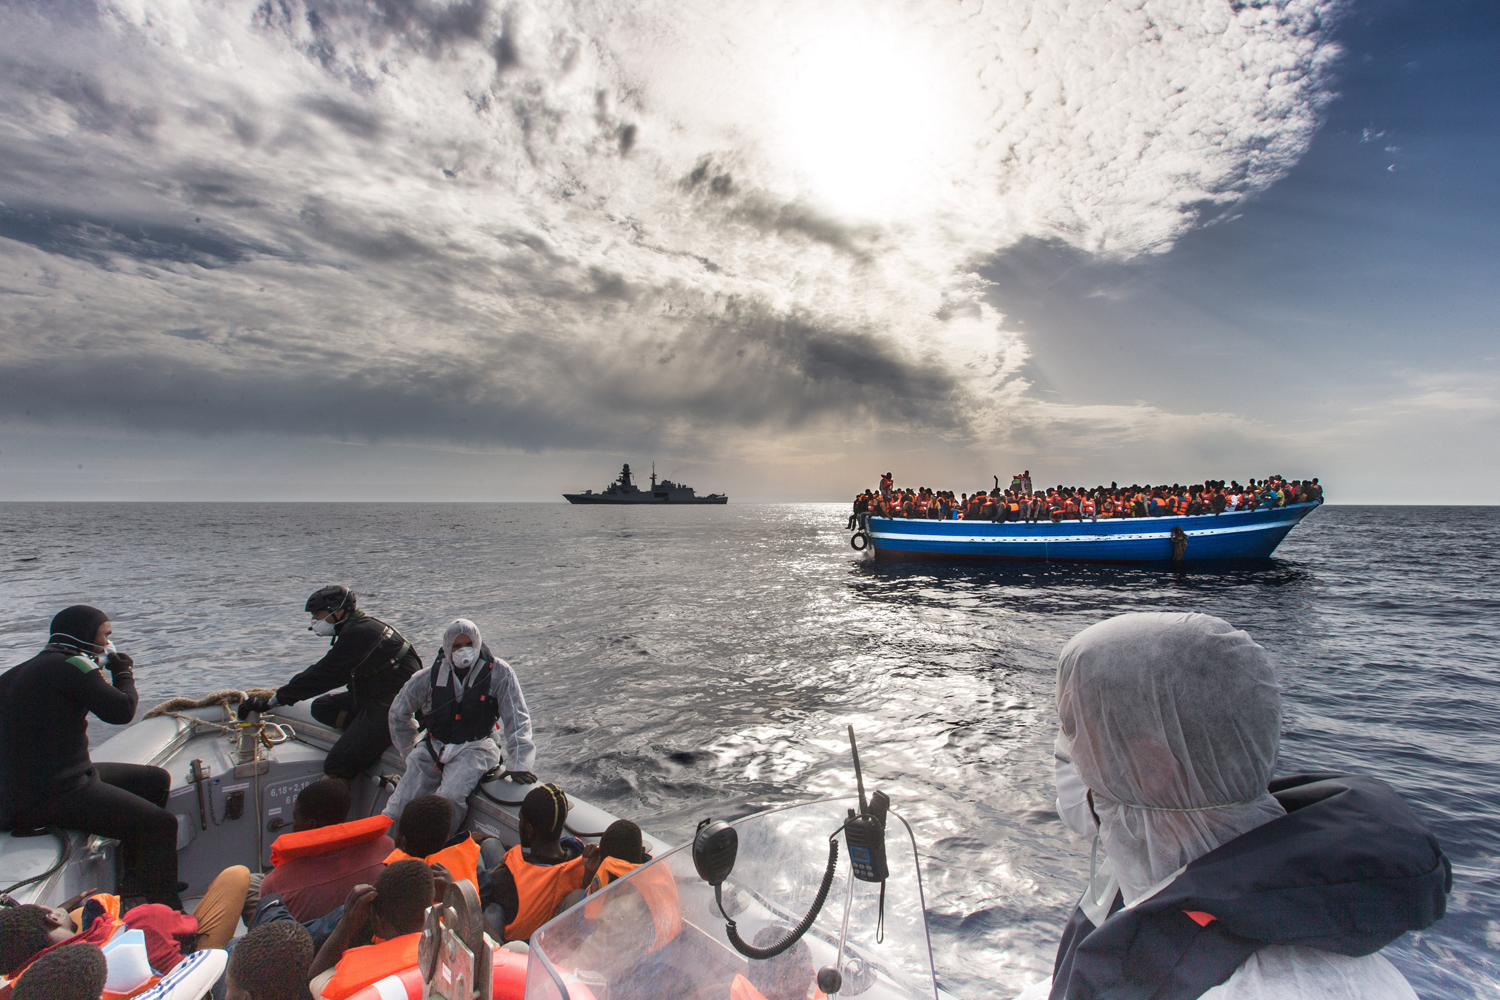 Refugees rescued off a boat and carried onto an Italian navy ship, June 7, 2014. (Massimo Sestini—Polaris)